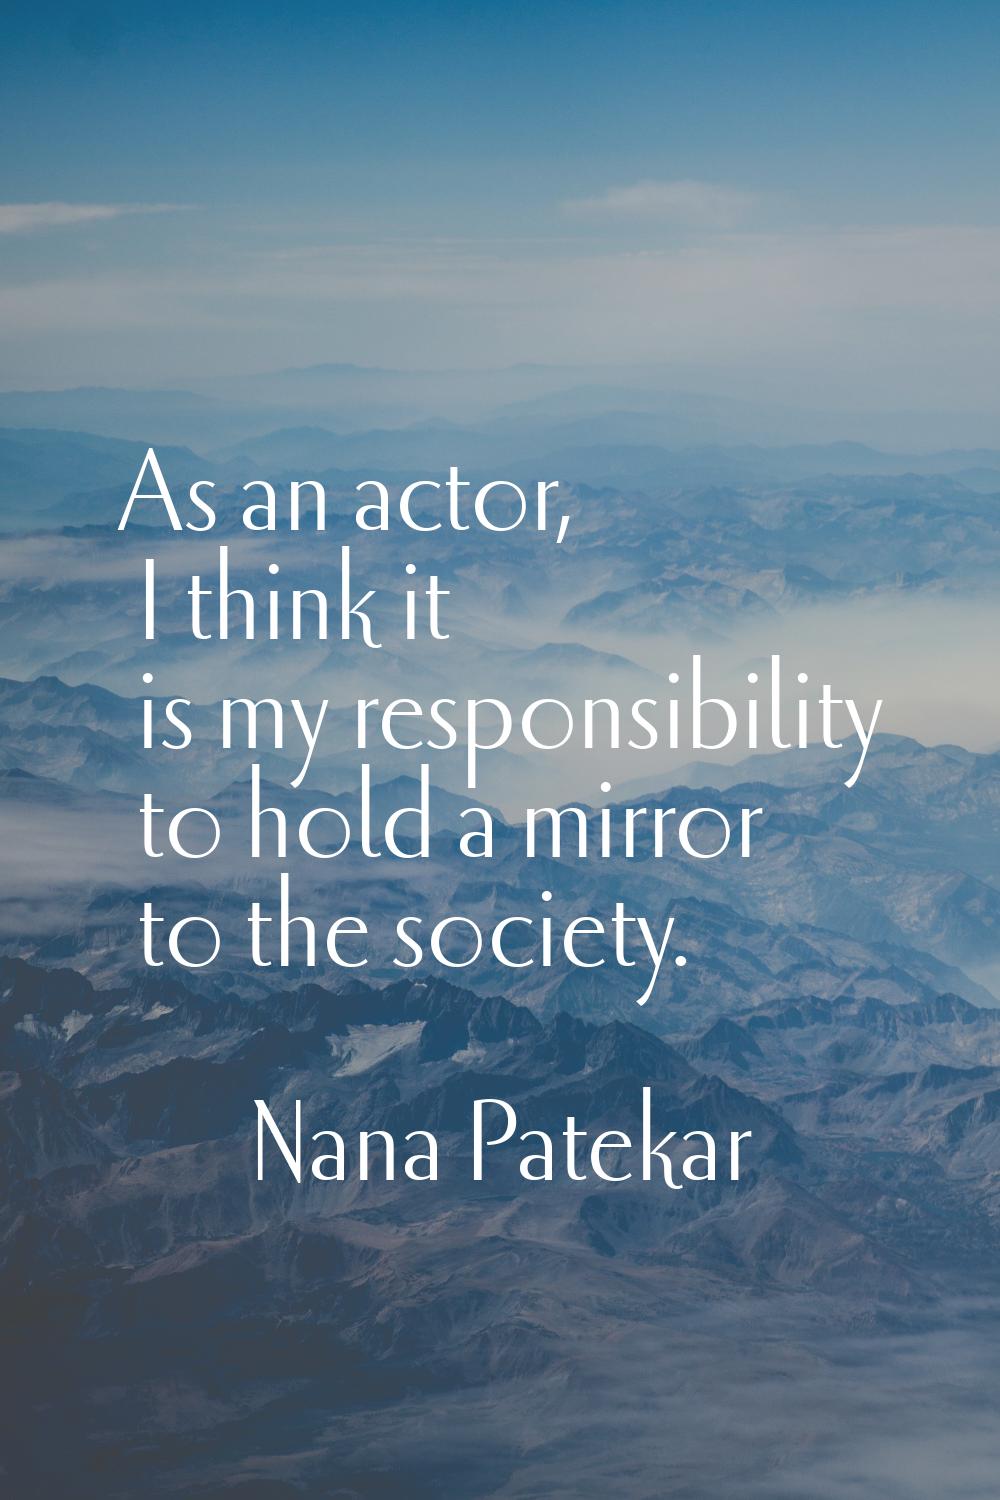 As an actor, I think it is my responsibility to hold a mirror to the society.